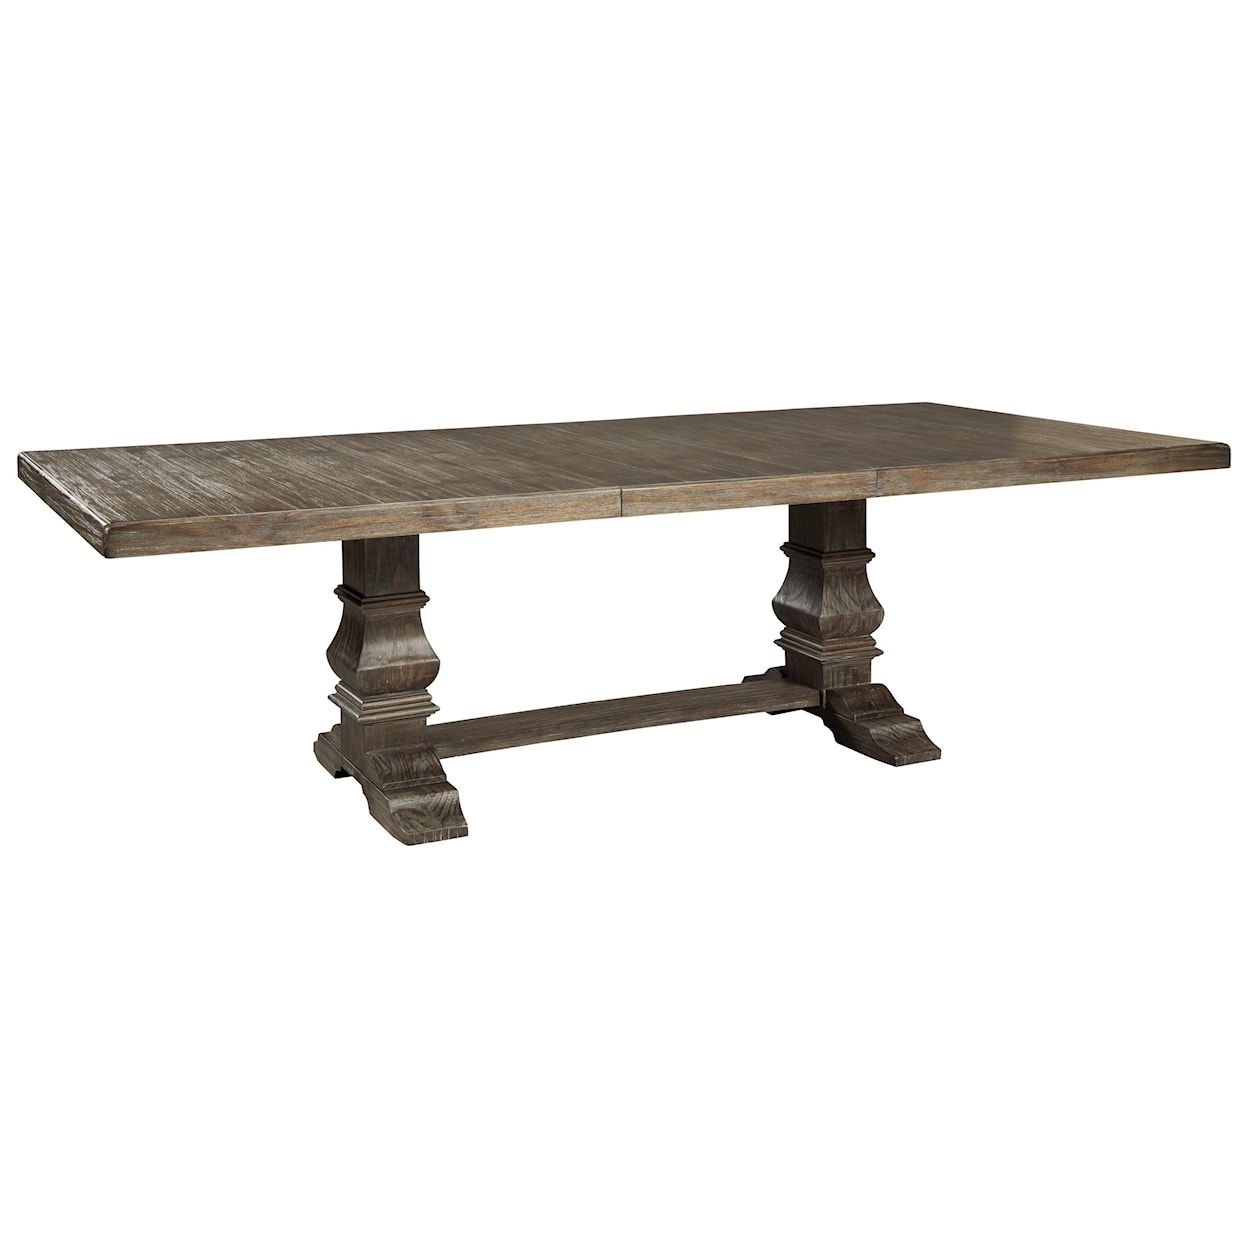 Signature Design by Ashley Wyndahl Rectangular Dining Room Extension Table